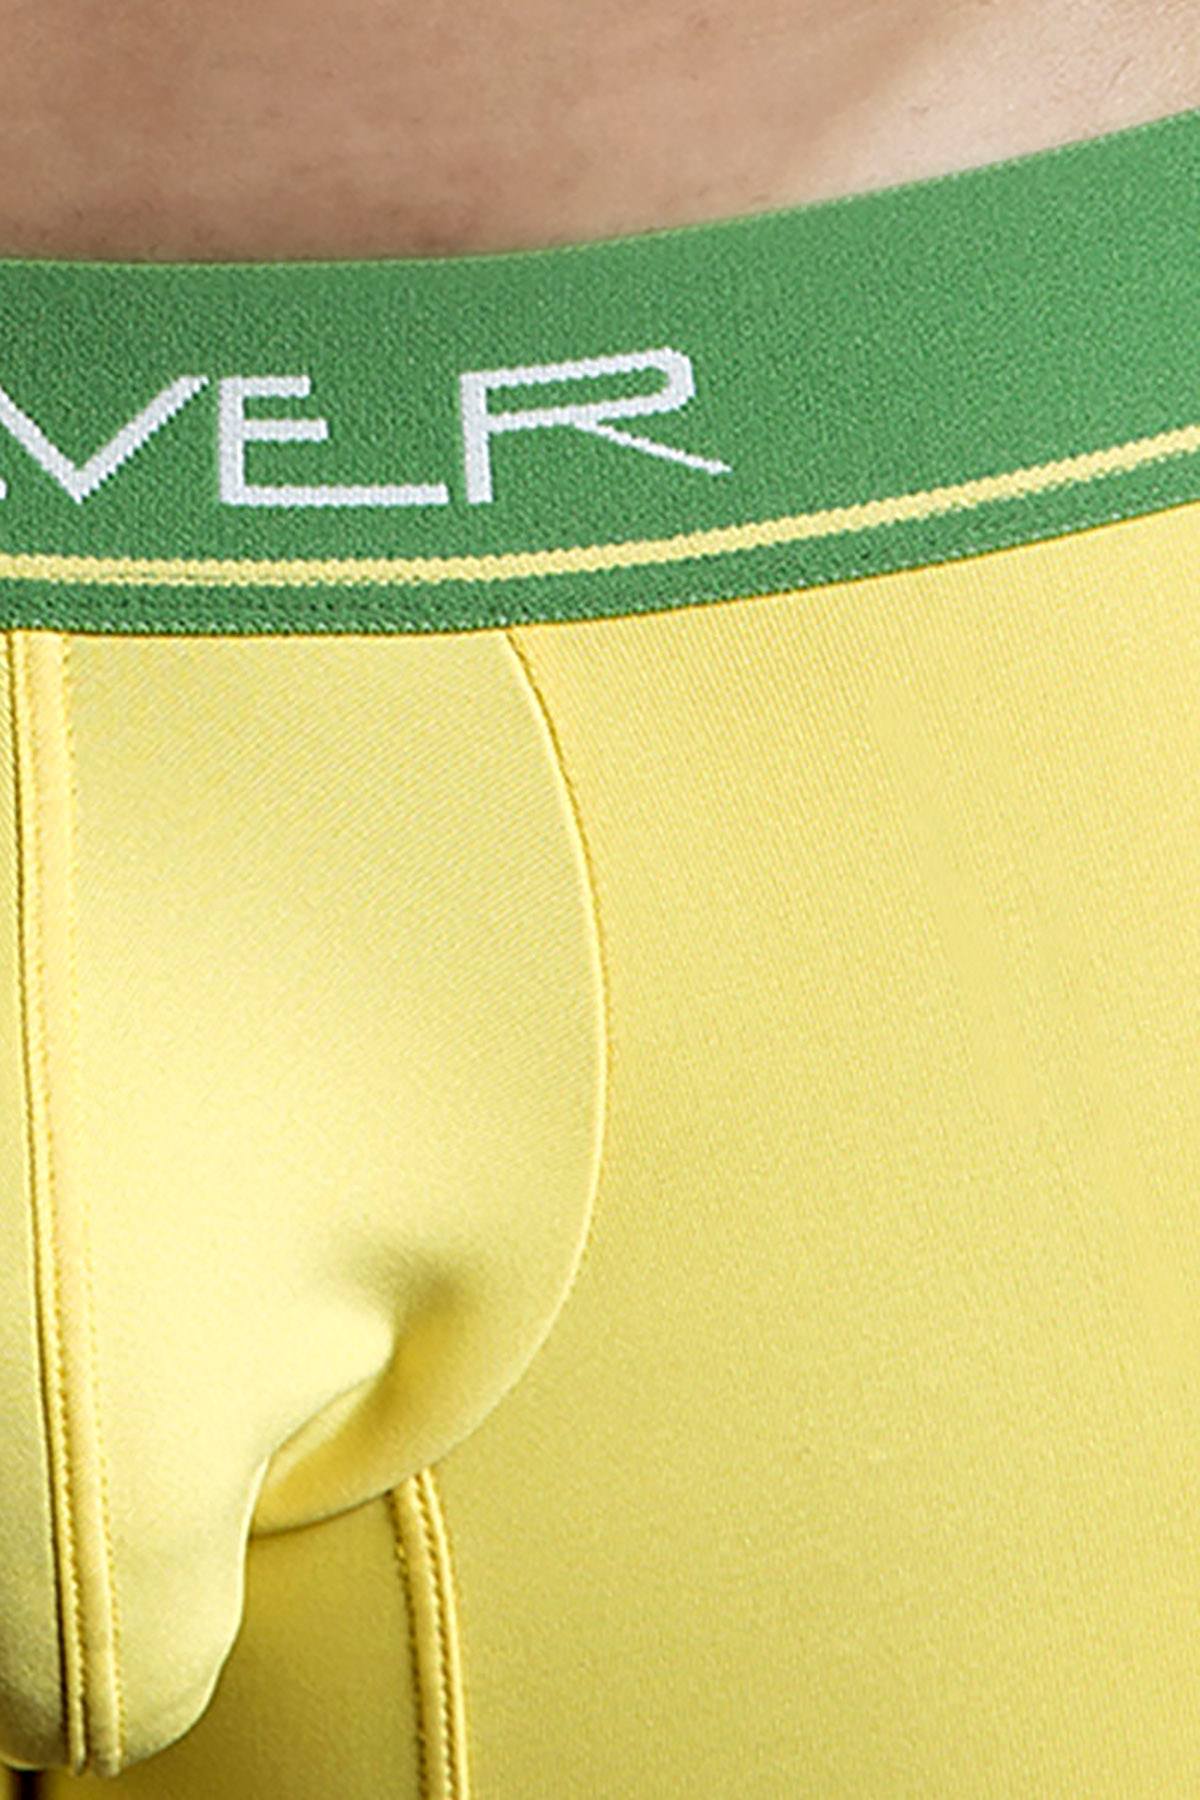 Clever Yellow/Green Limited Edition Trunk